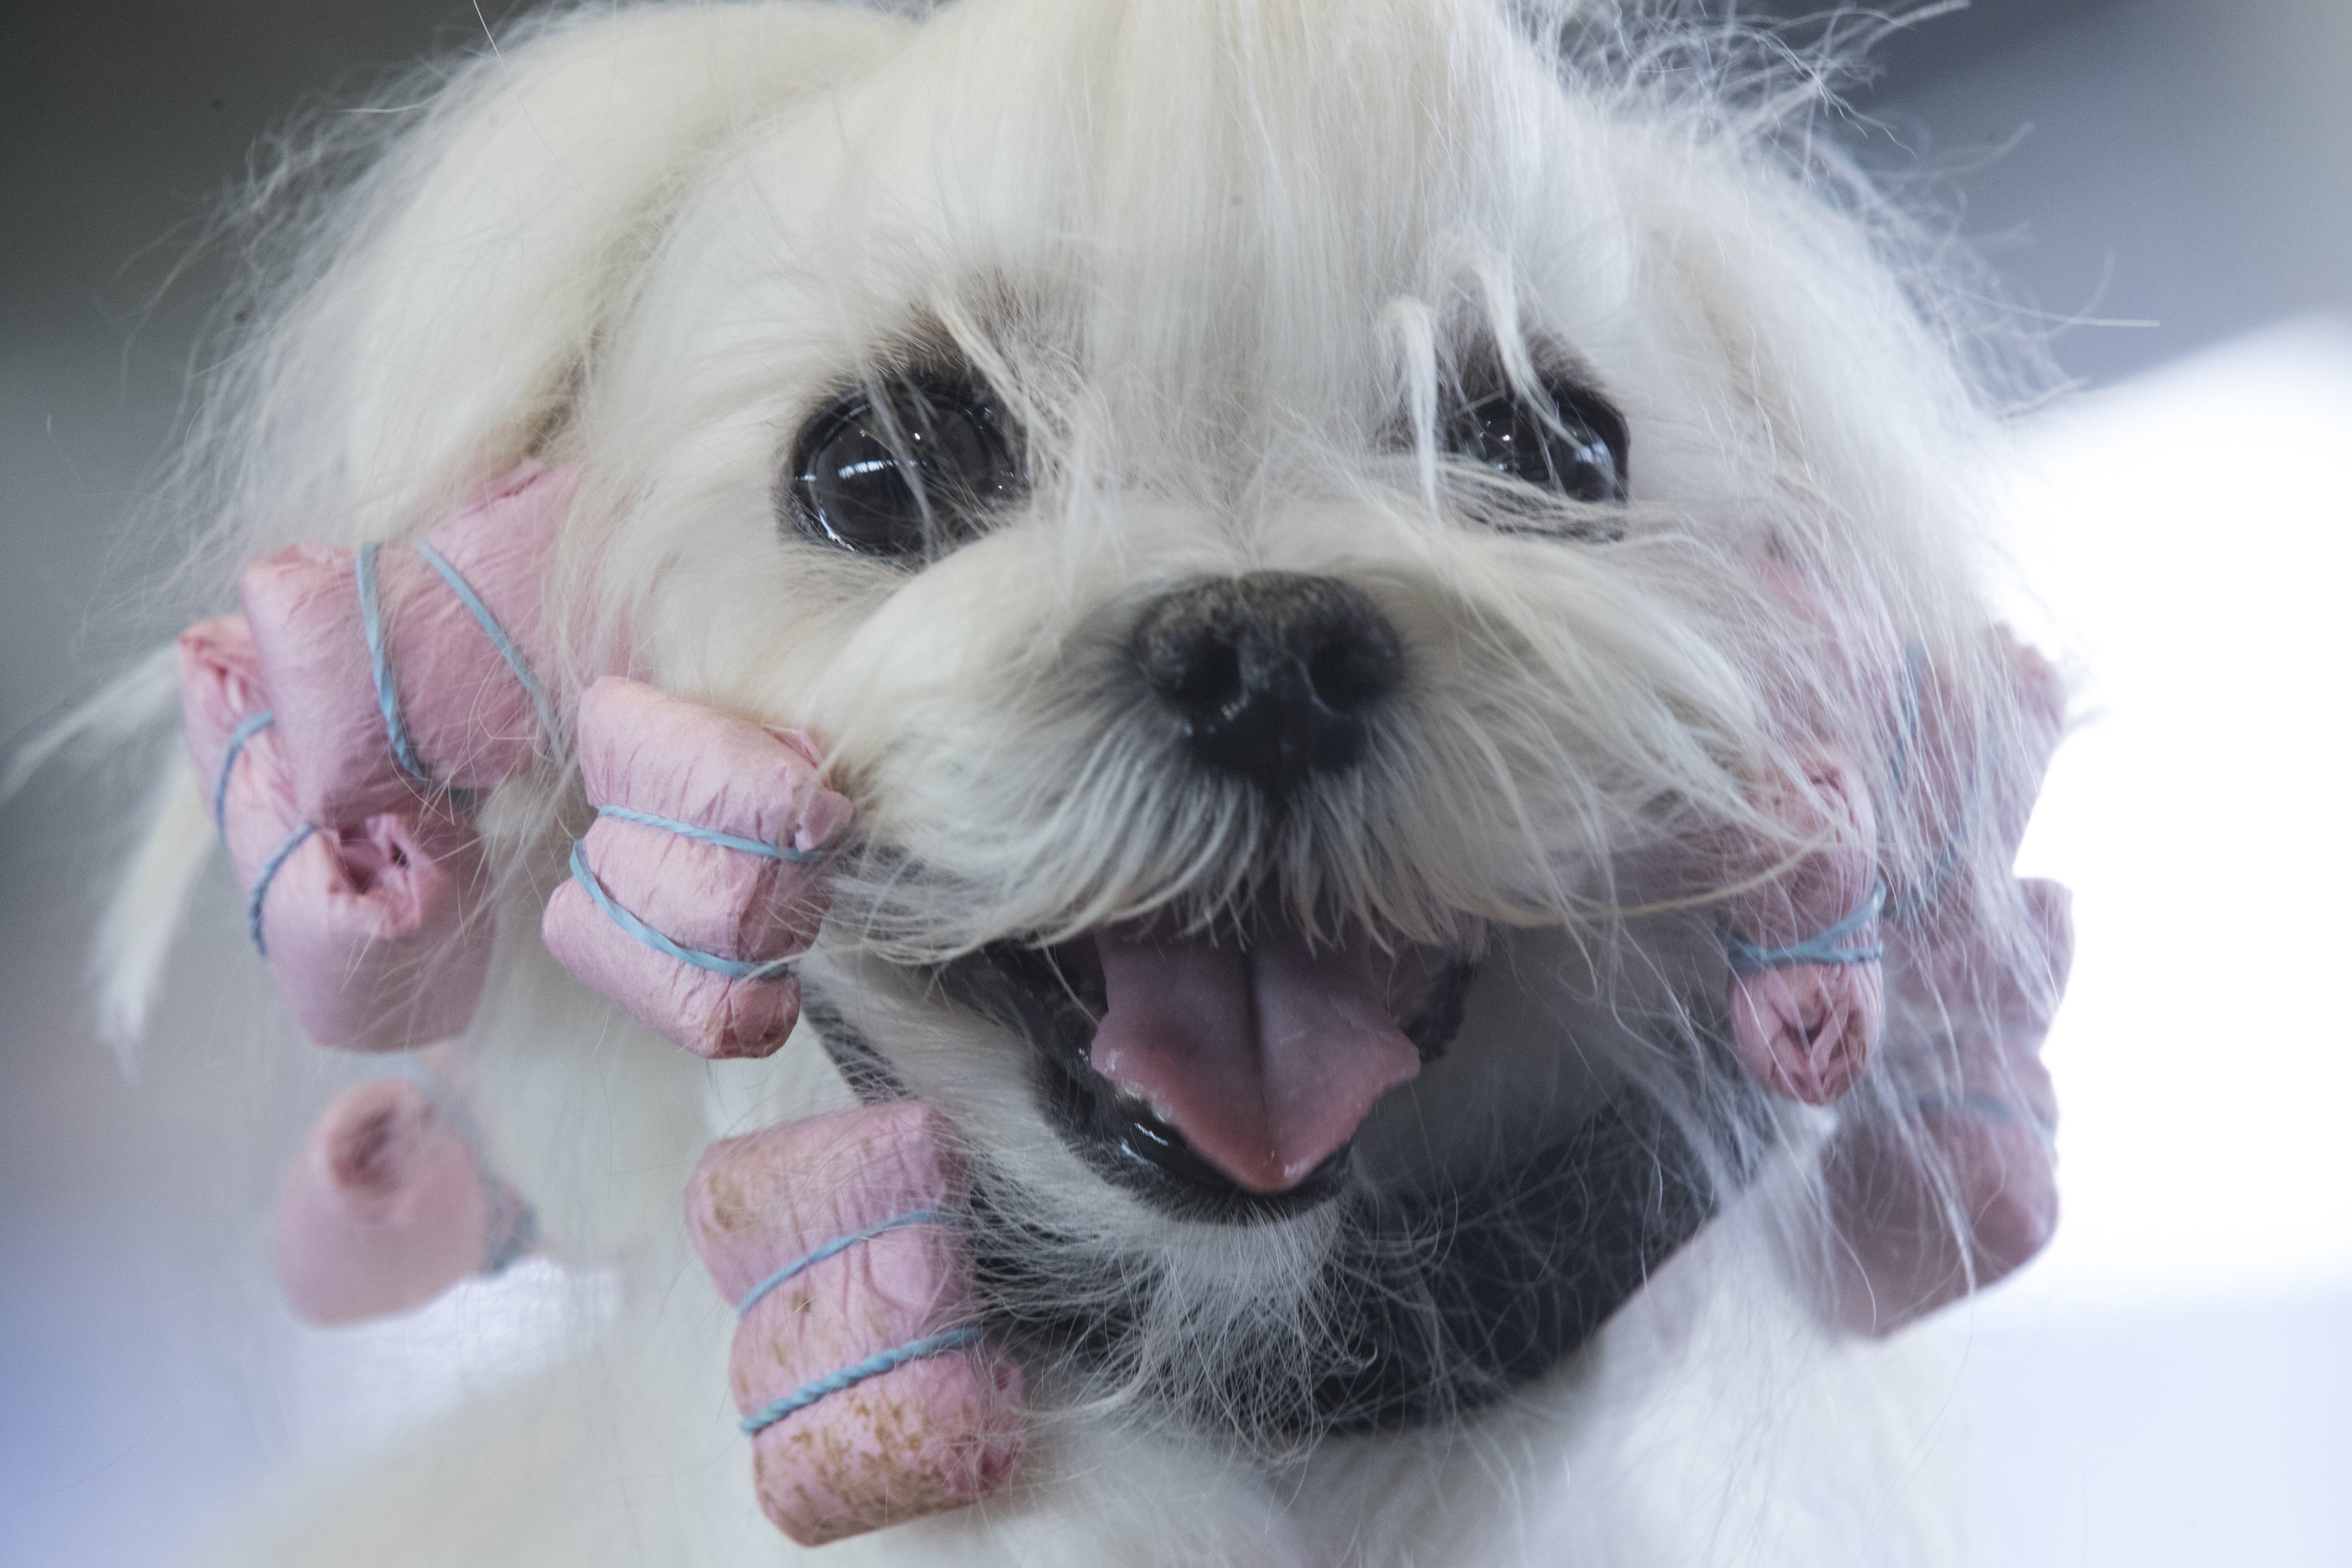 B boy, a Maltese from France, is groomed in the staging area during the 141st Westminster Kennel Club Dog Show, Monday, Feb. 13, 2017, in New York. (AP Photo/Mary Altaffer)